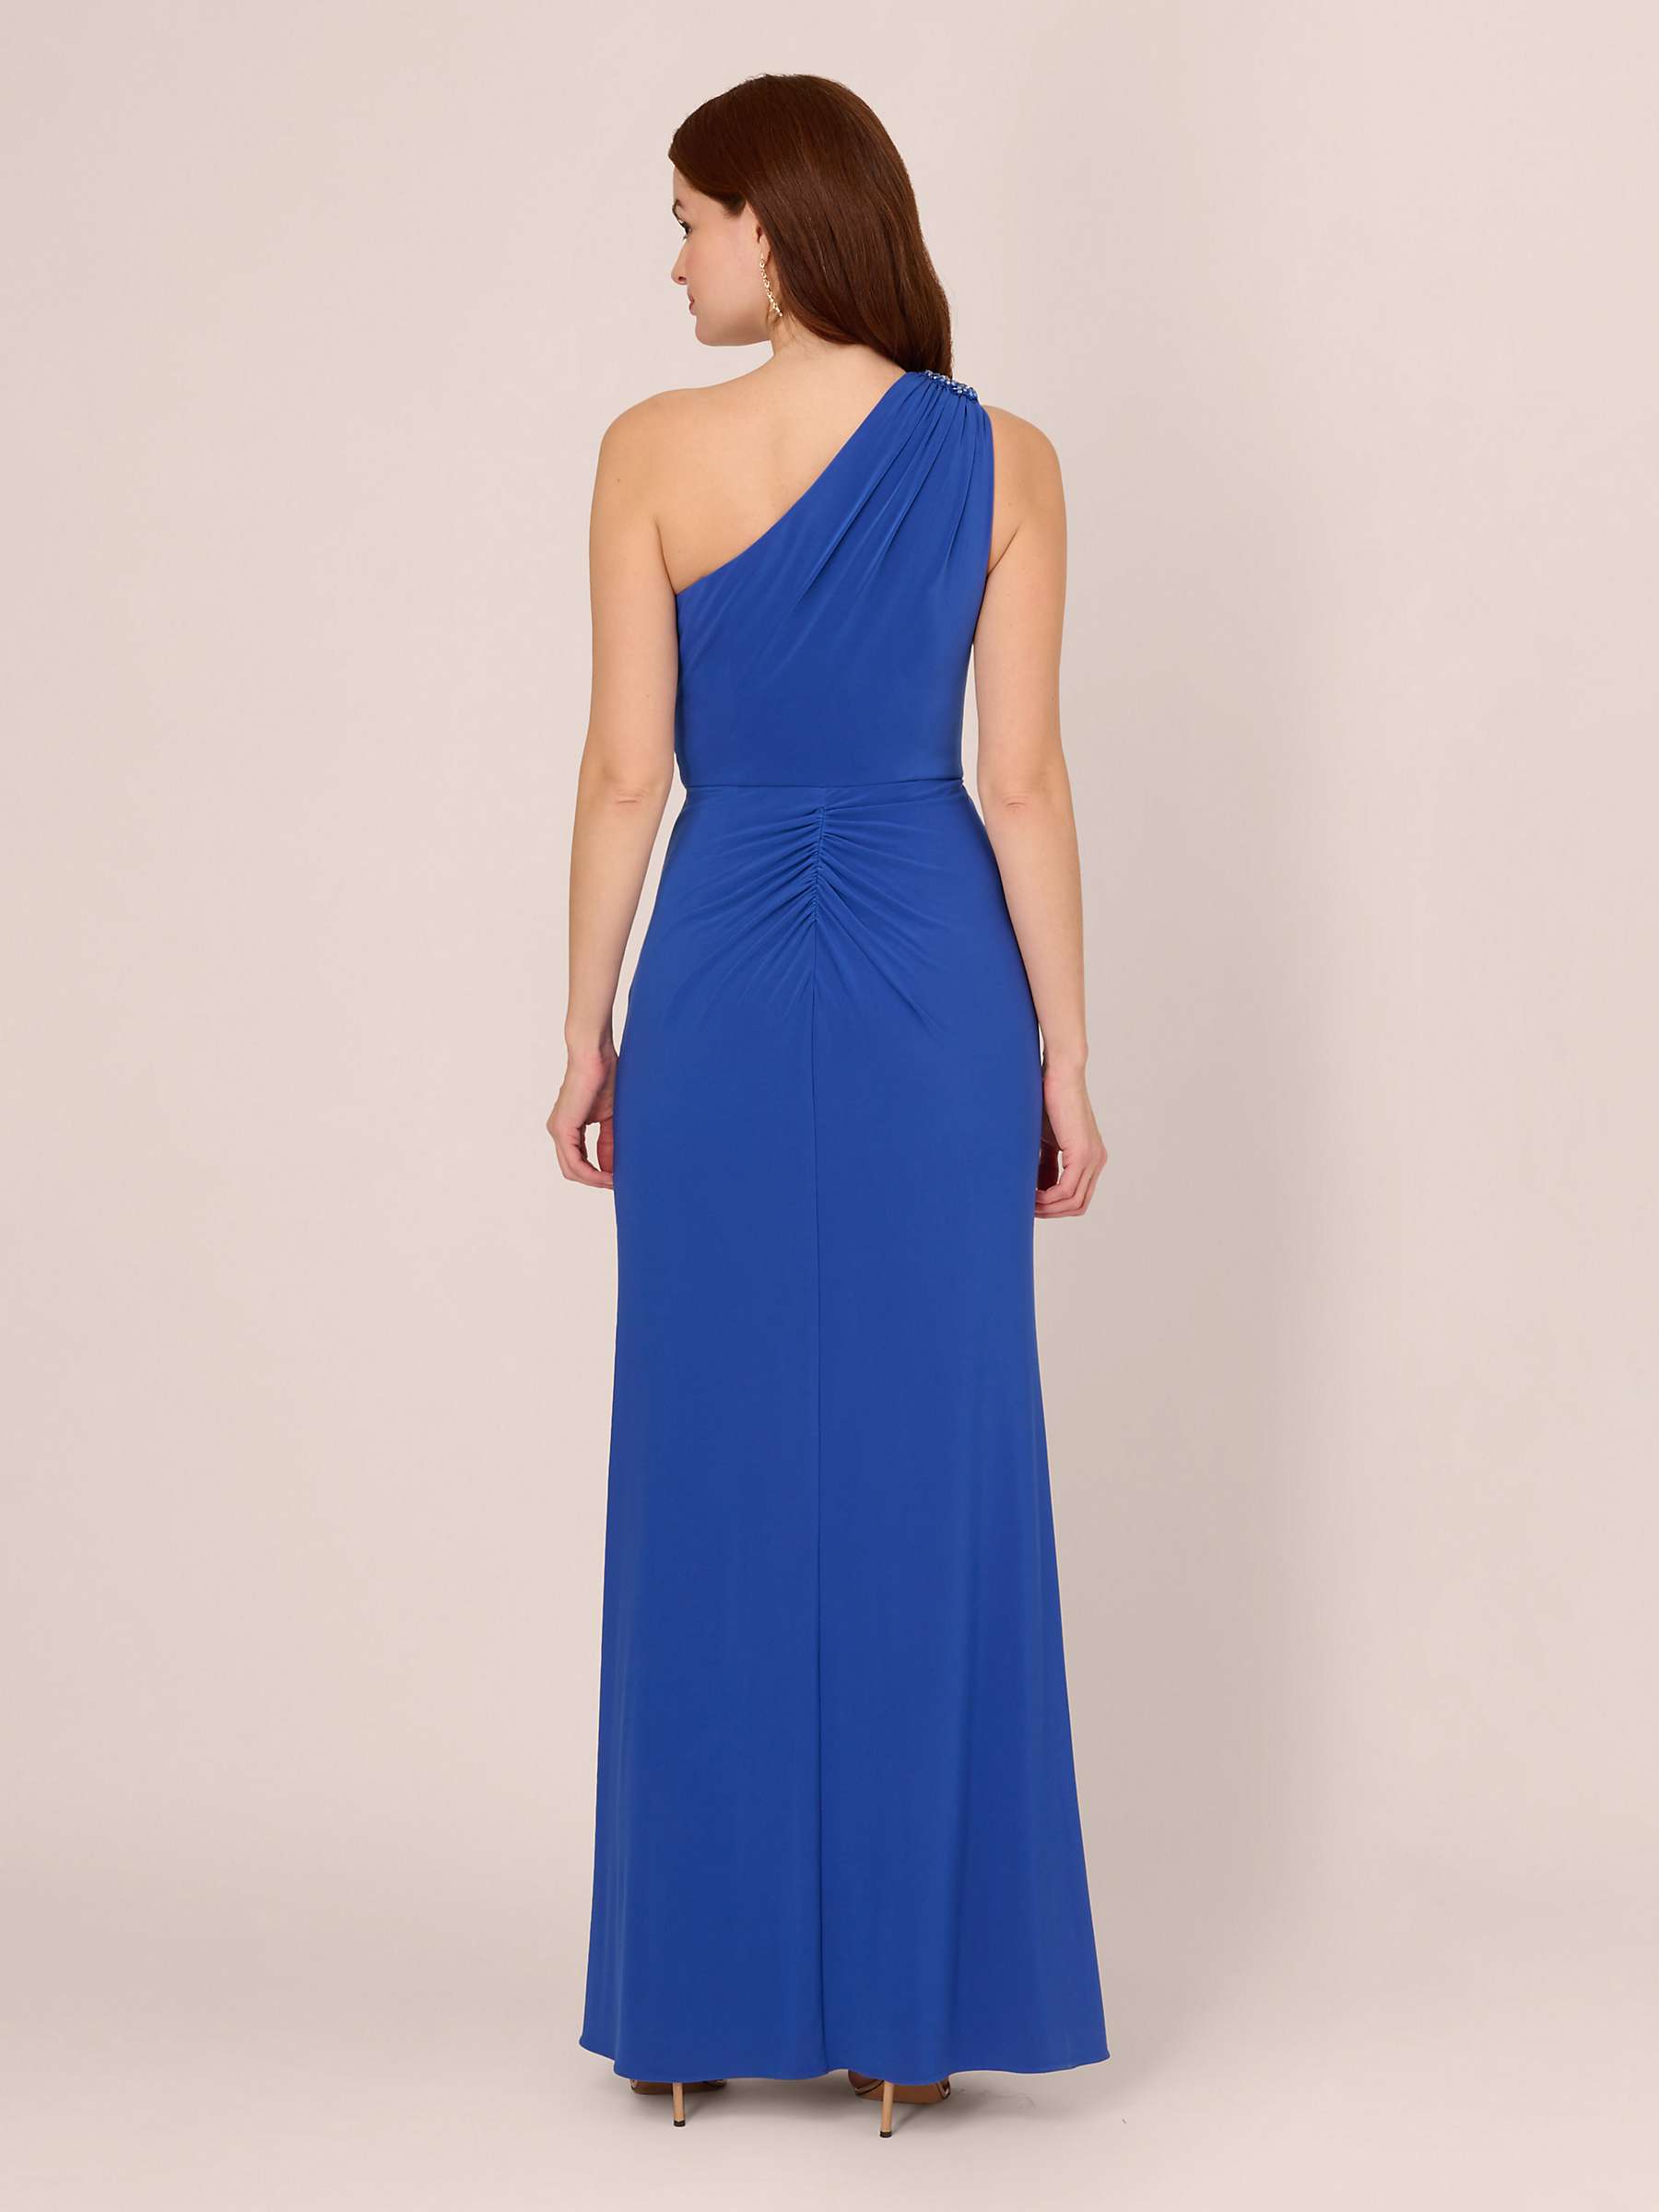 Buy Adrianna Papell One Shoulder Embellished Jersey Maxi Dress, Brilliant Sapphire Online at johnlewis.com